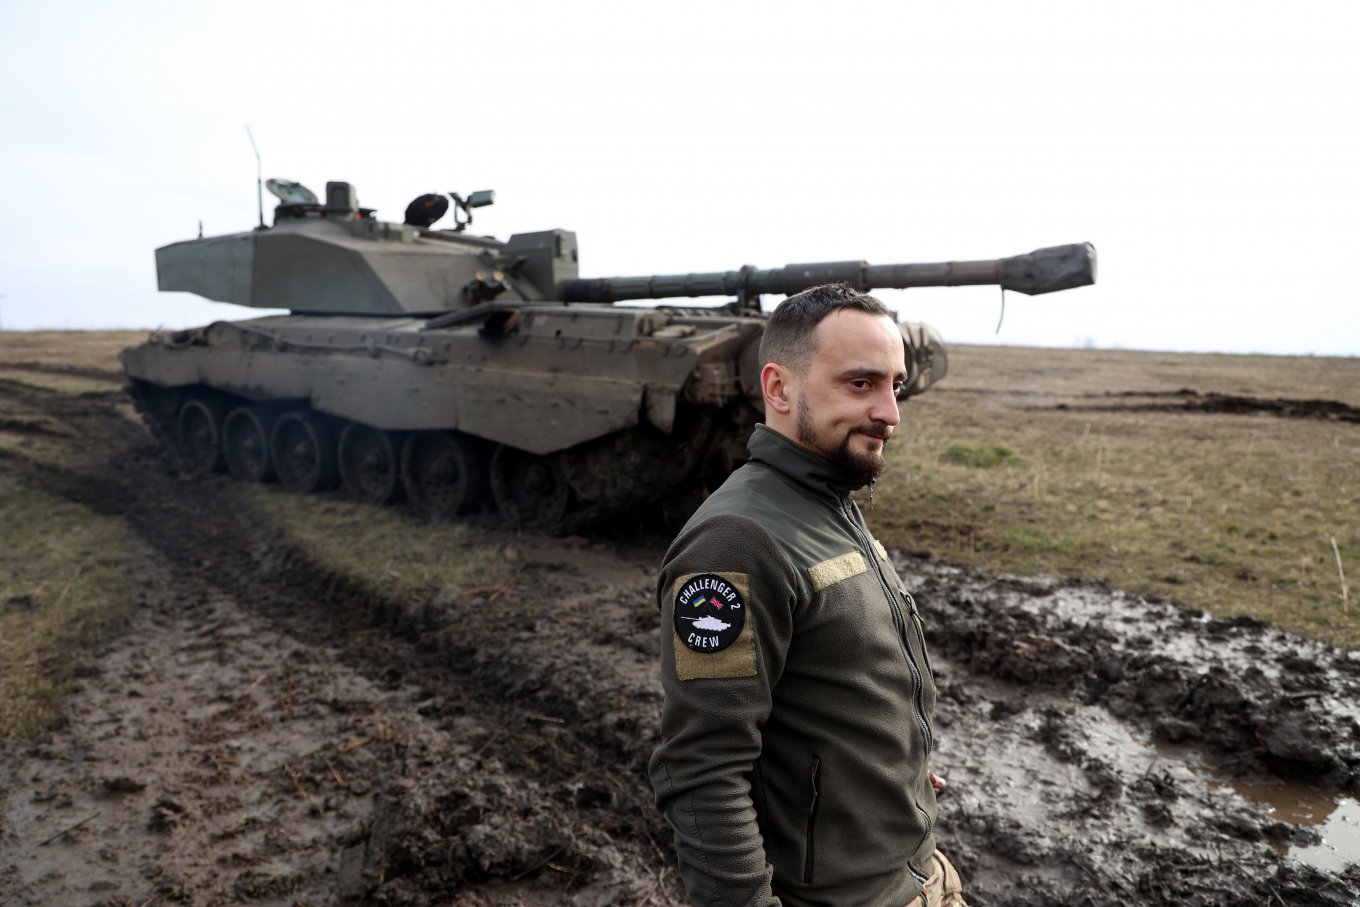 Ukrainian Challenger 2 tank and one of its crew